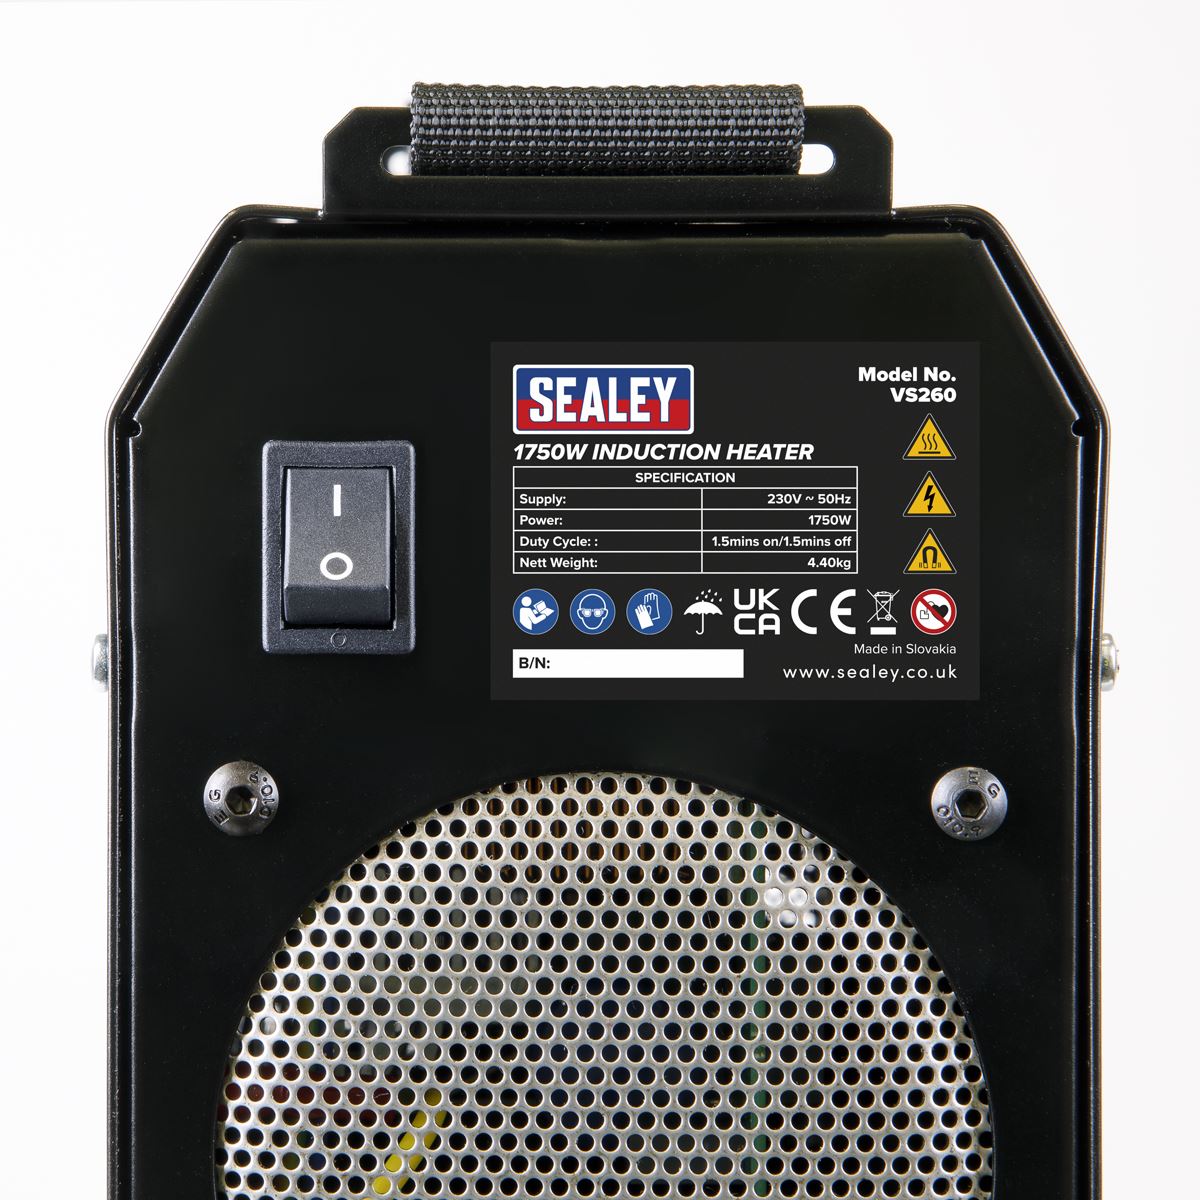 Sealey Induction Heater 1750W